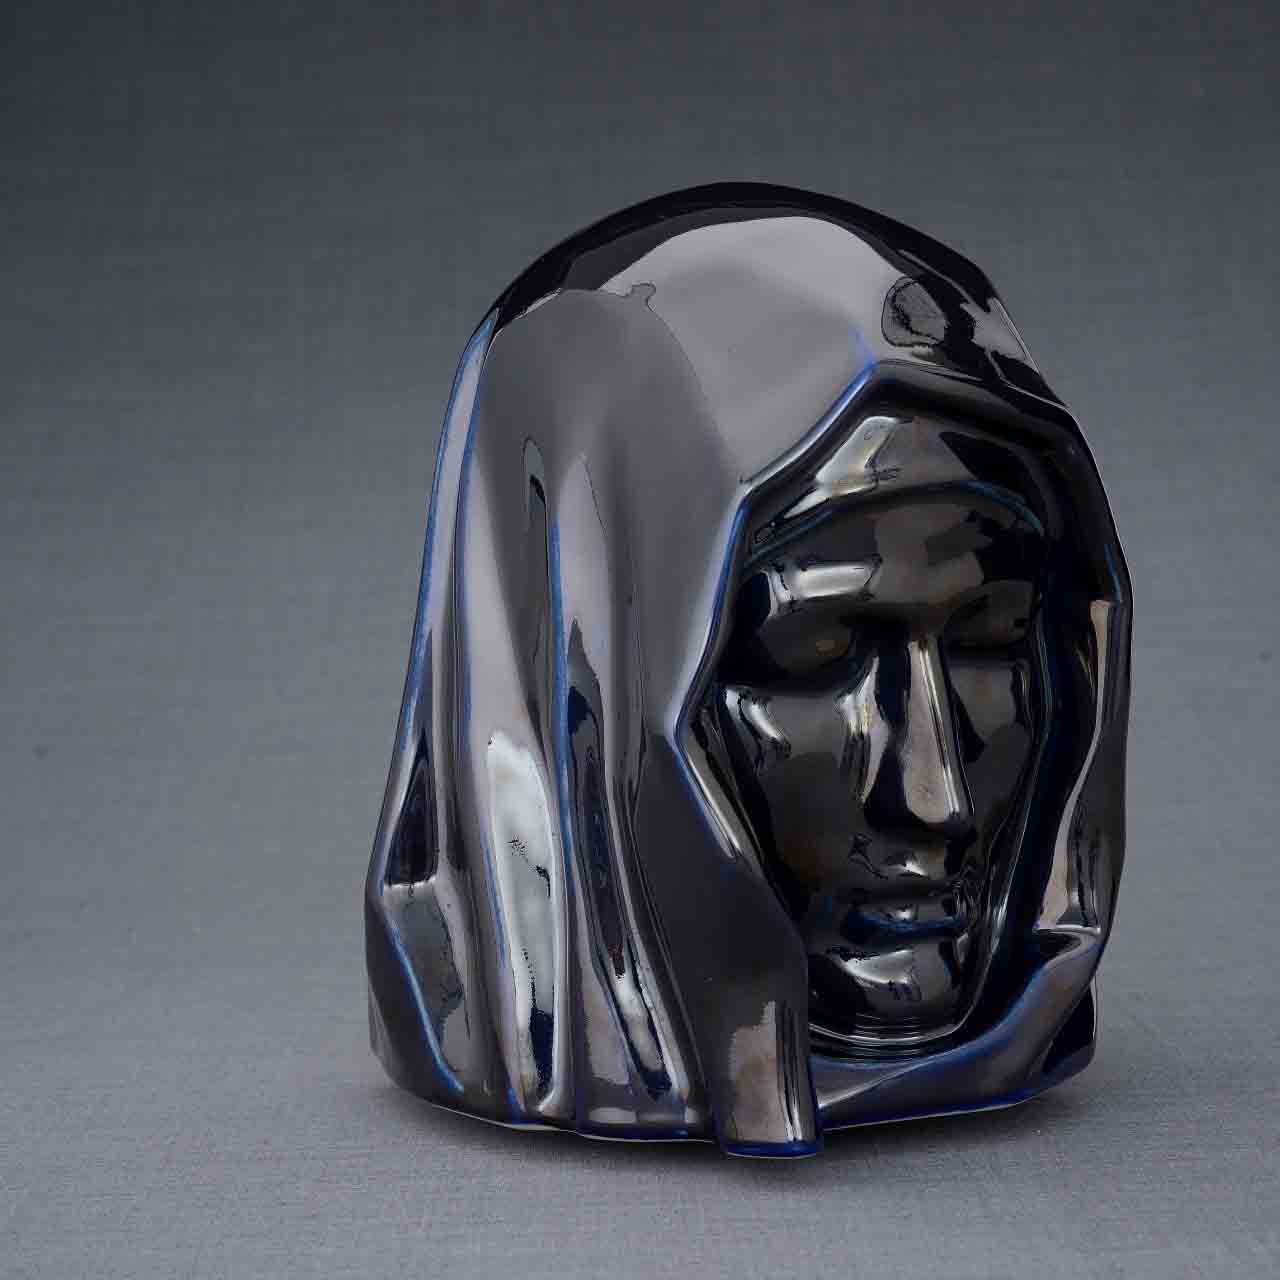 The Holy Mother Cremation Urn for Ashes in Metallic Blue Turned Right Dark Background